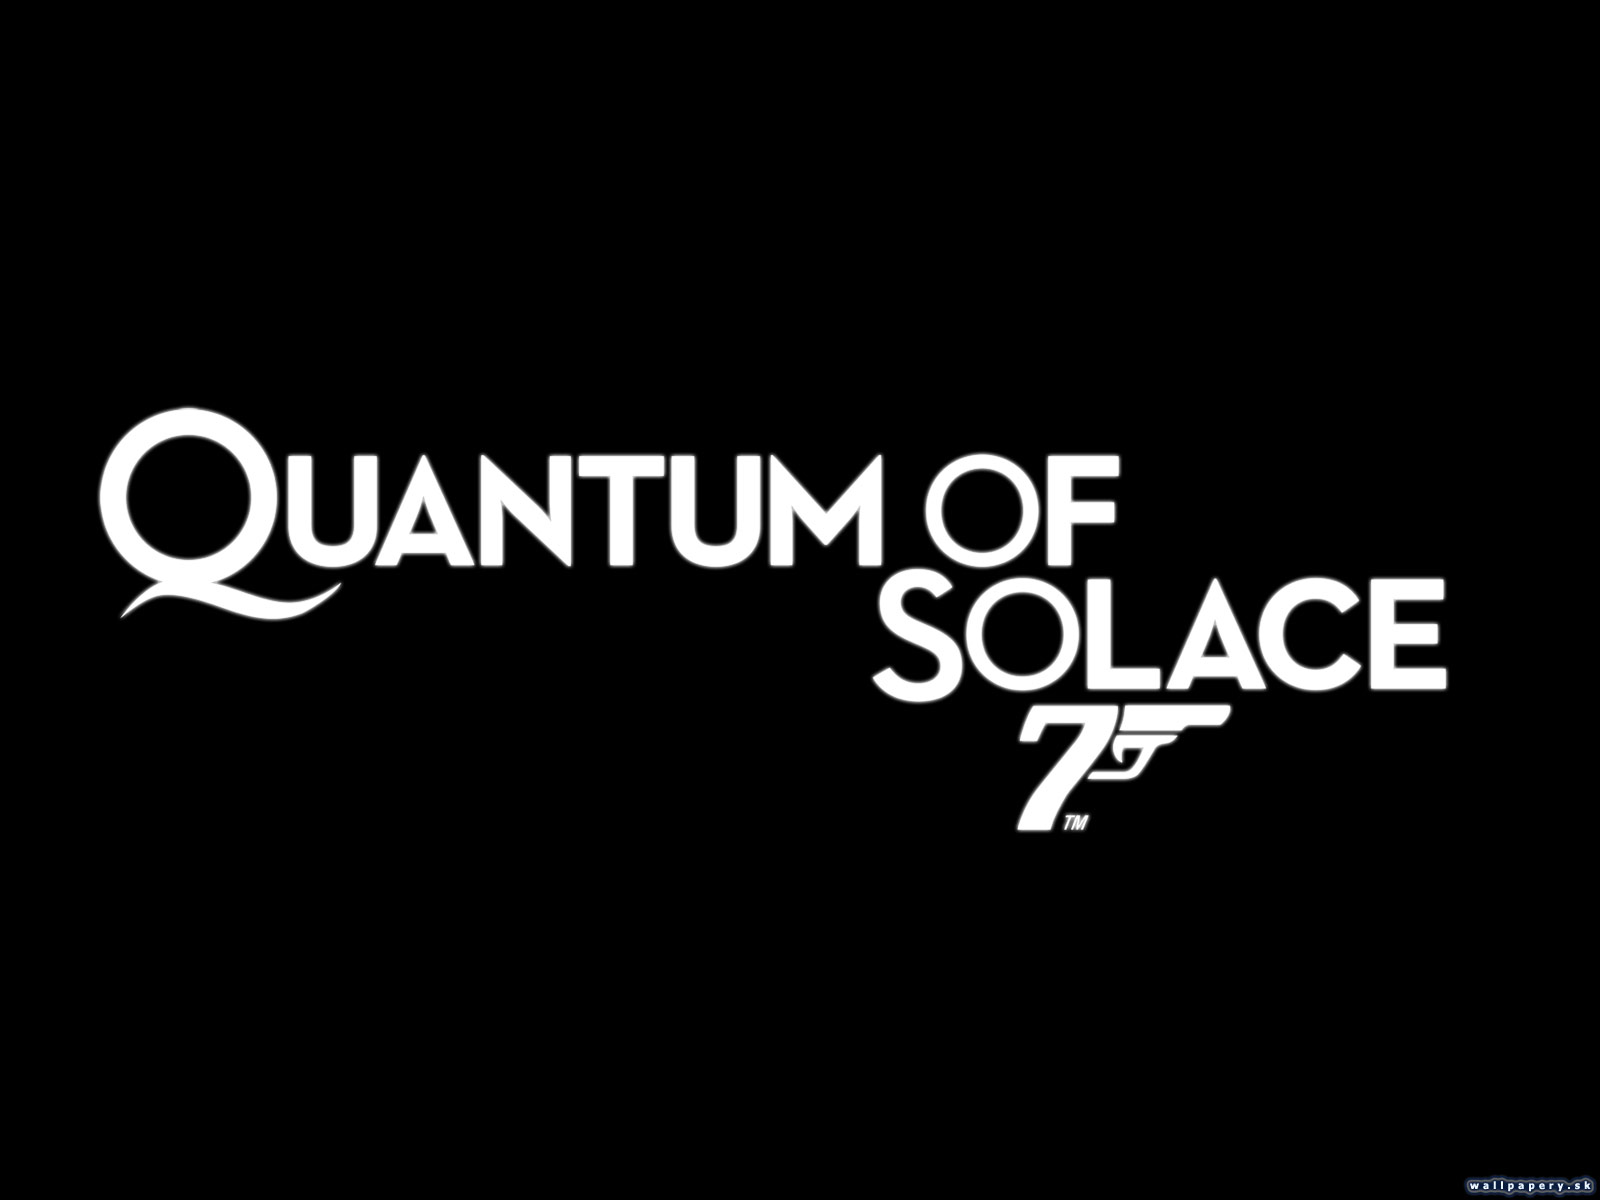 Quantum of Solace: The Game - wallpaper 6